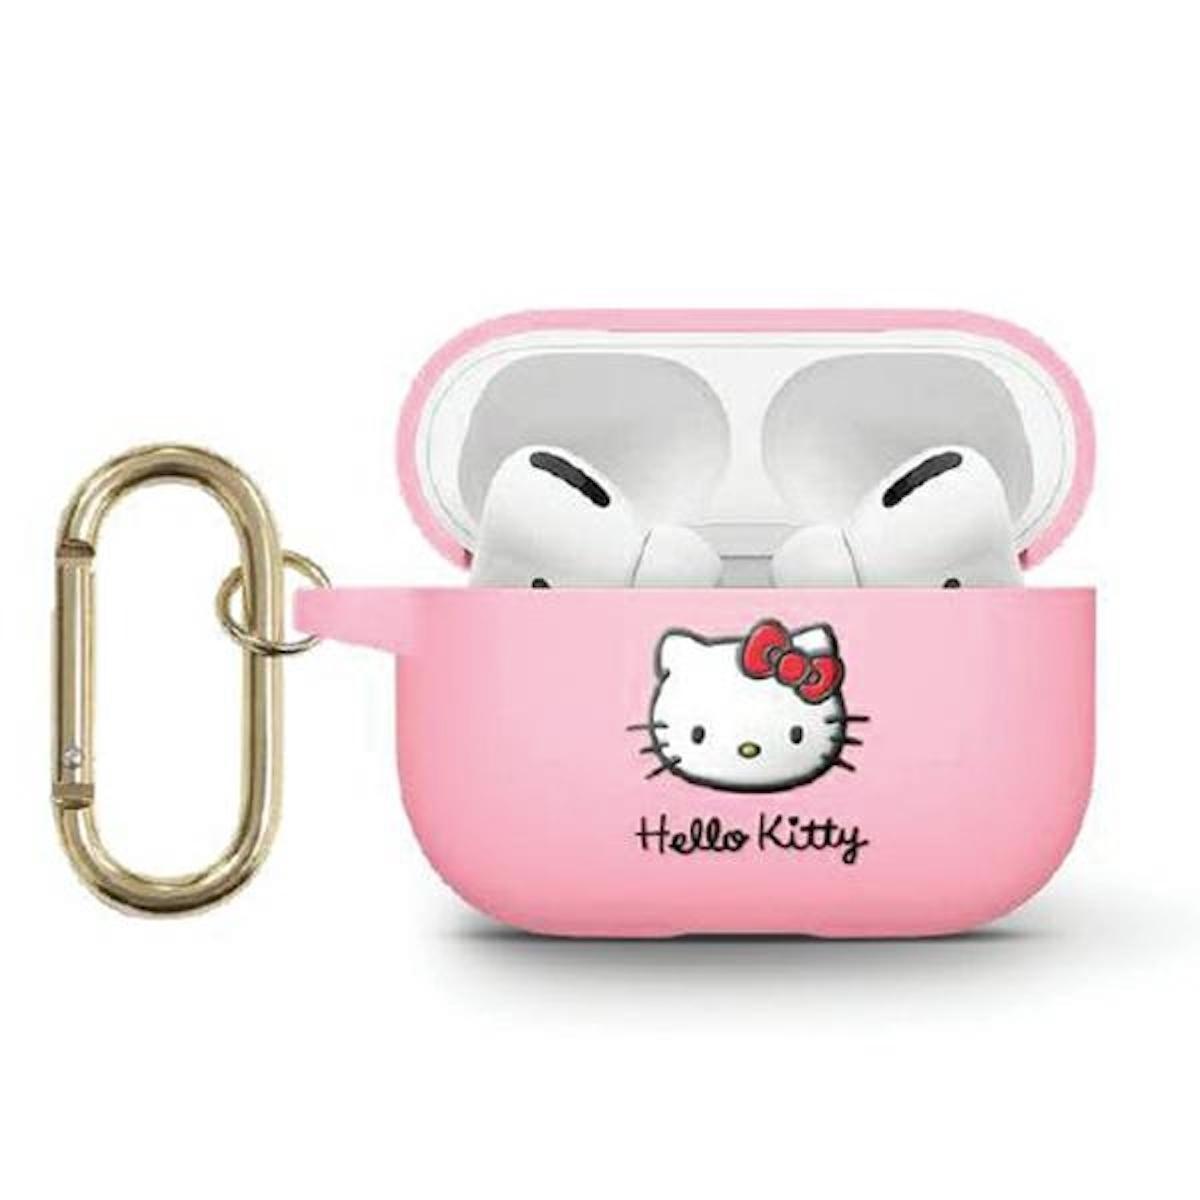 Full Head Hülle BY AirPods Kitty Silikon Rosa Apple, HELLO KITTY 3, Cover, 3D AirPods CHEFMADE Schutzhülle, Tasche